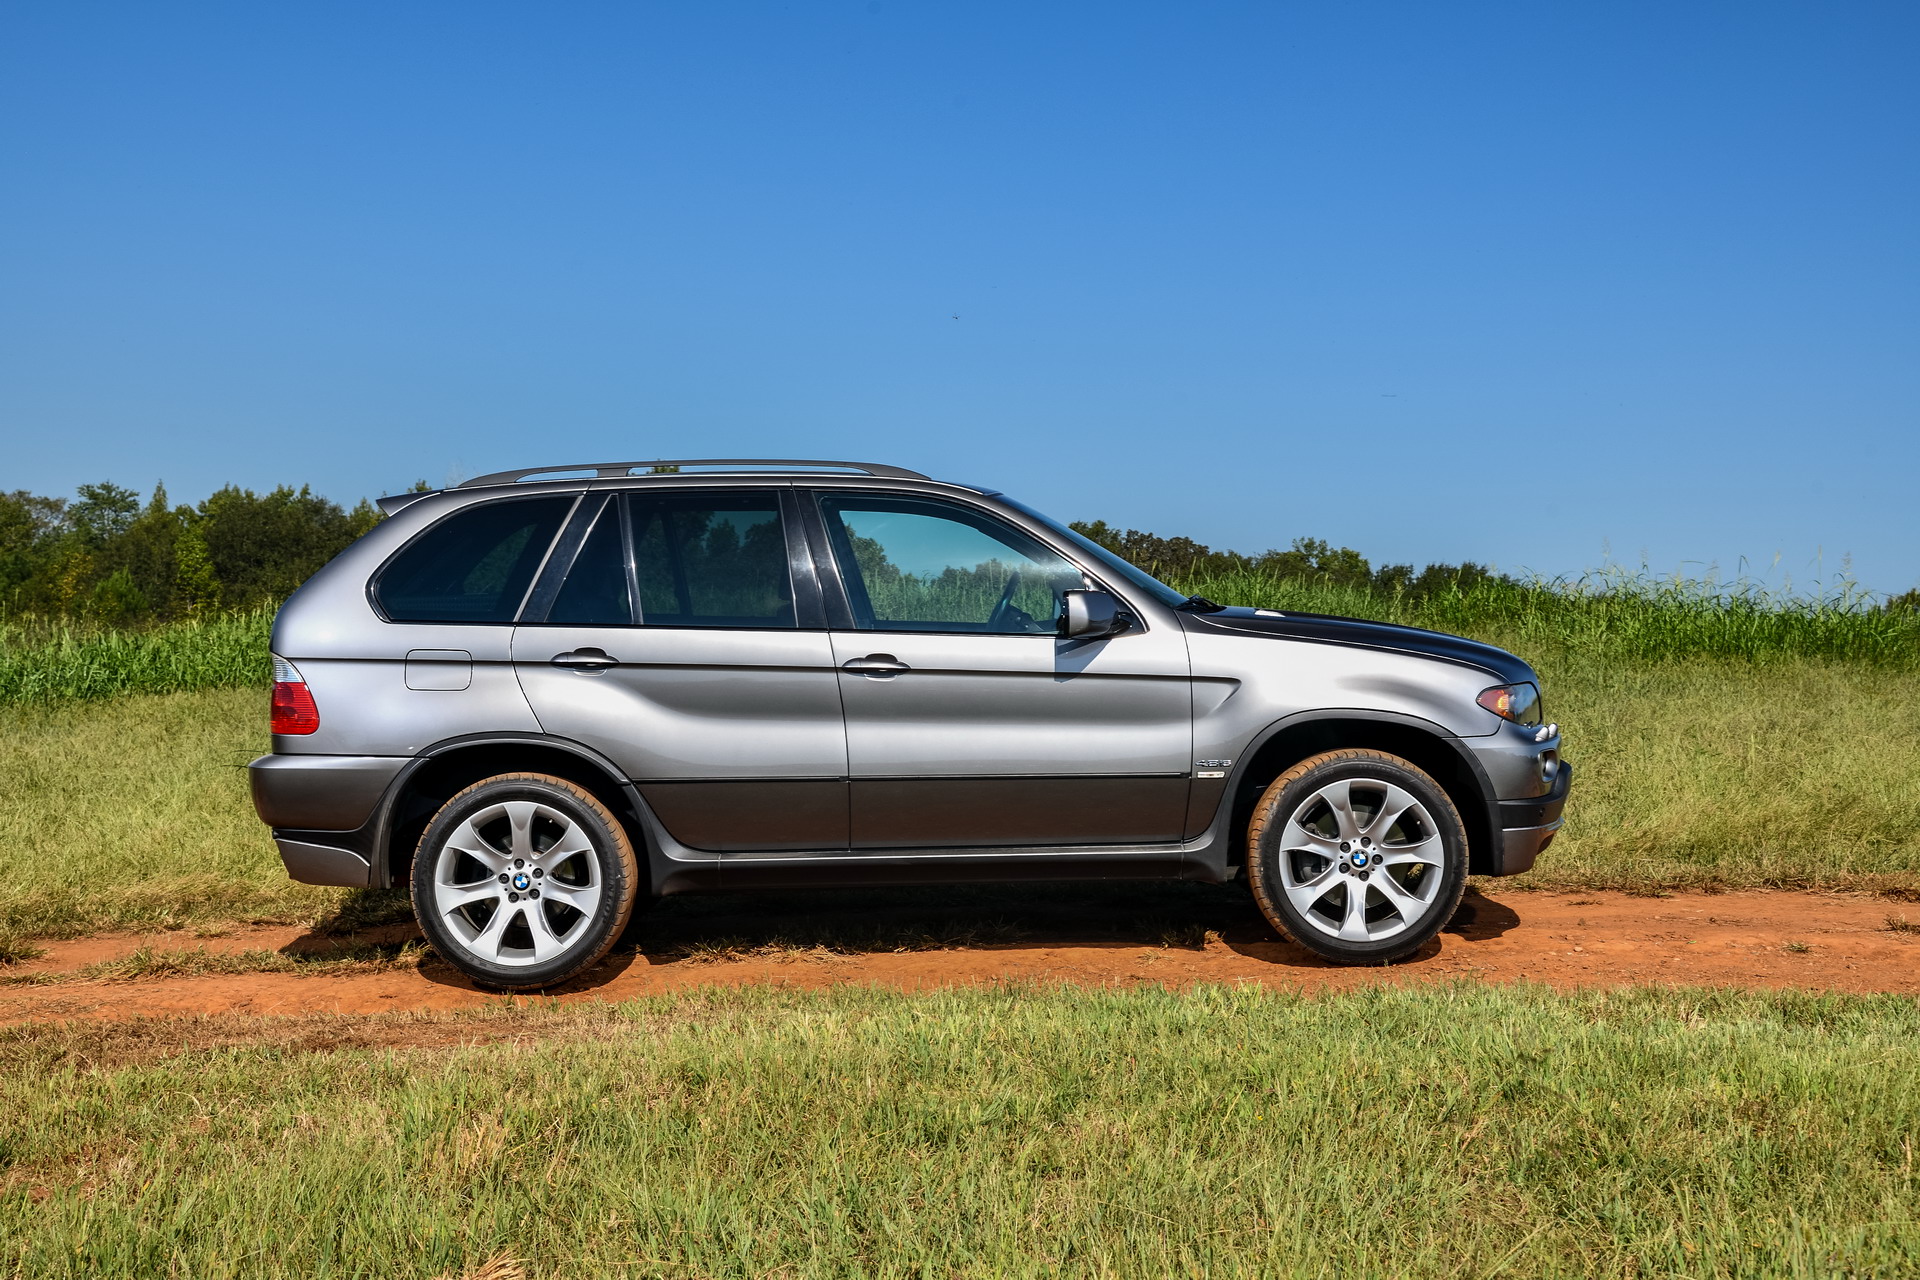 Is the E53 BMW X5 with a Manual Transmission Awesome to Own?